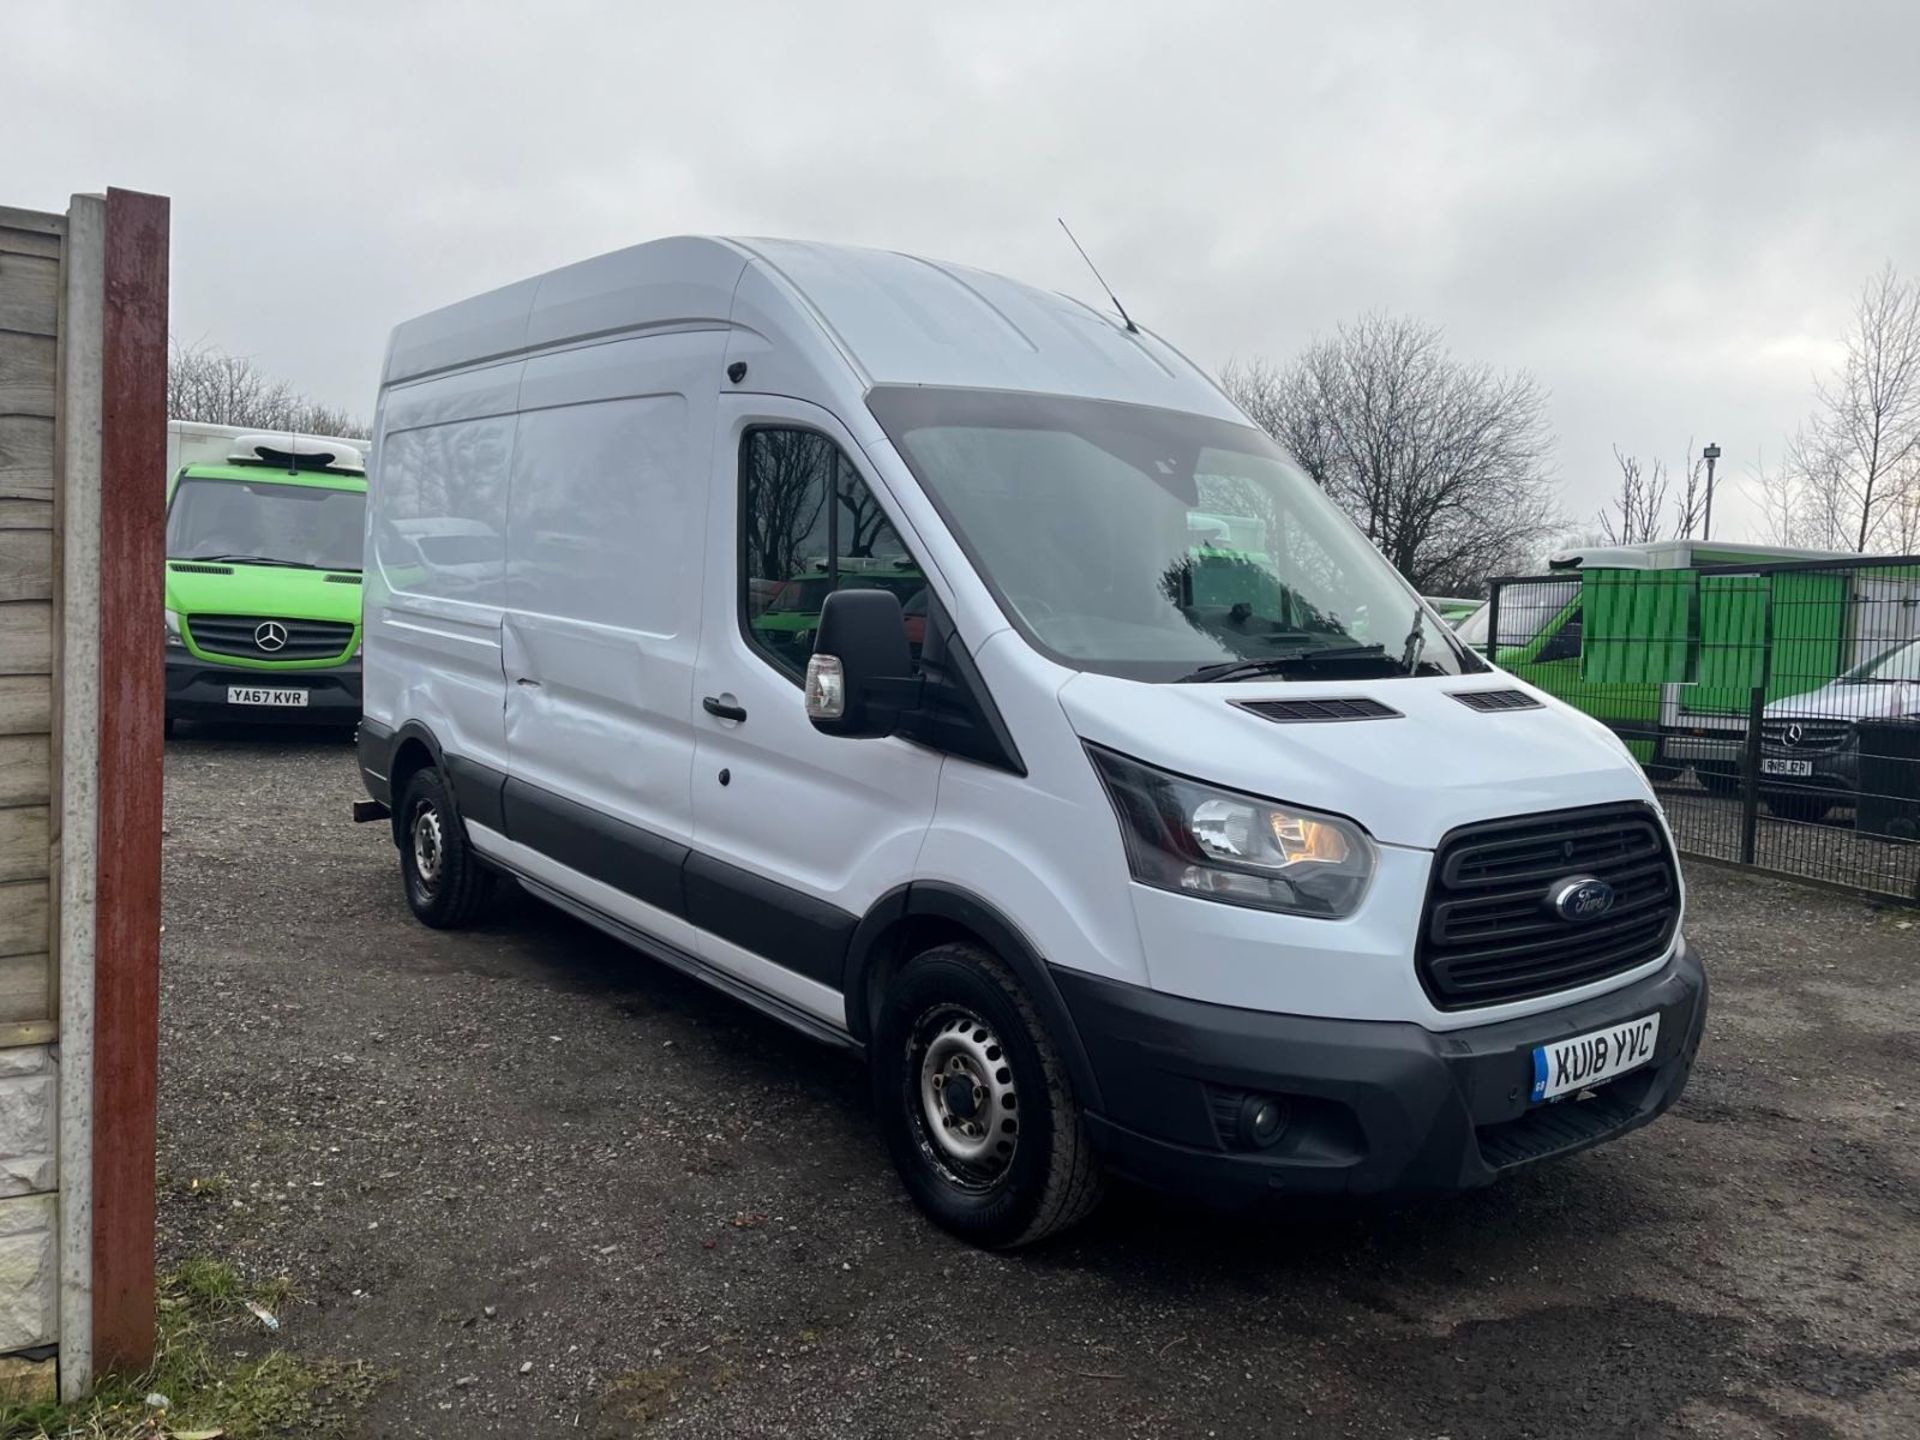 >>>SPECIAL CLEARANCE<<< 2018 FORD TRANSIT 2.0 TDCI 130PS L3 H3 - RELIABLE LONG WHEELBASE PANEL VAN